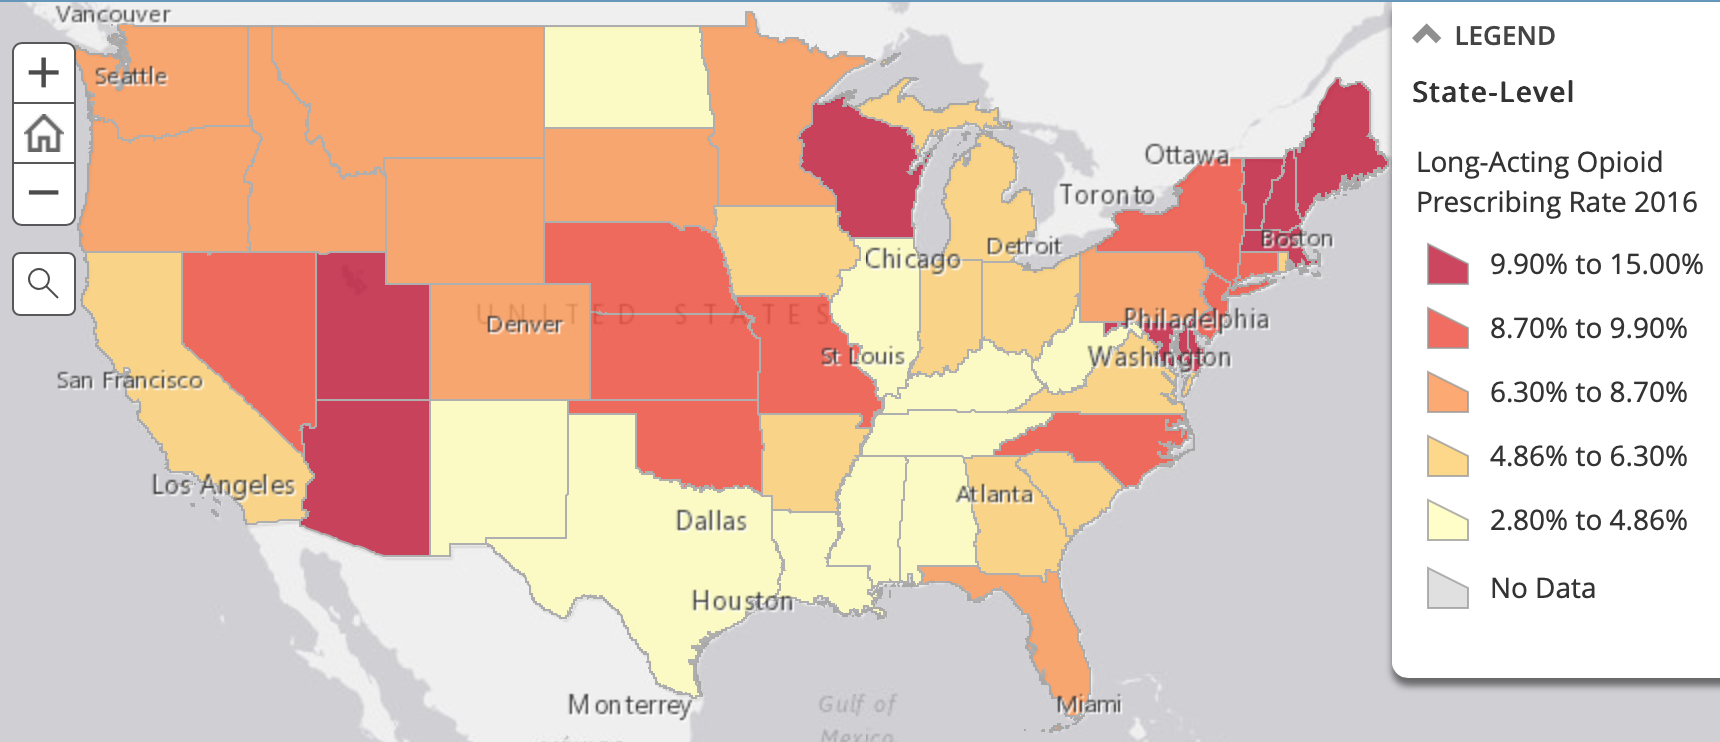 A map illustrating Opioid prescription rates across the USA in 2016